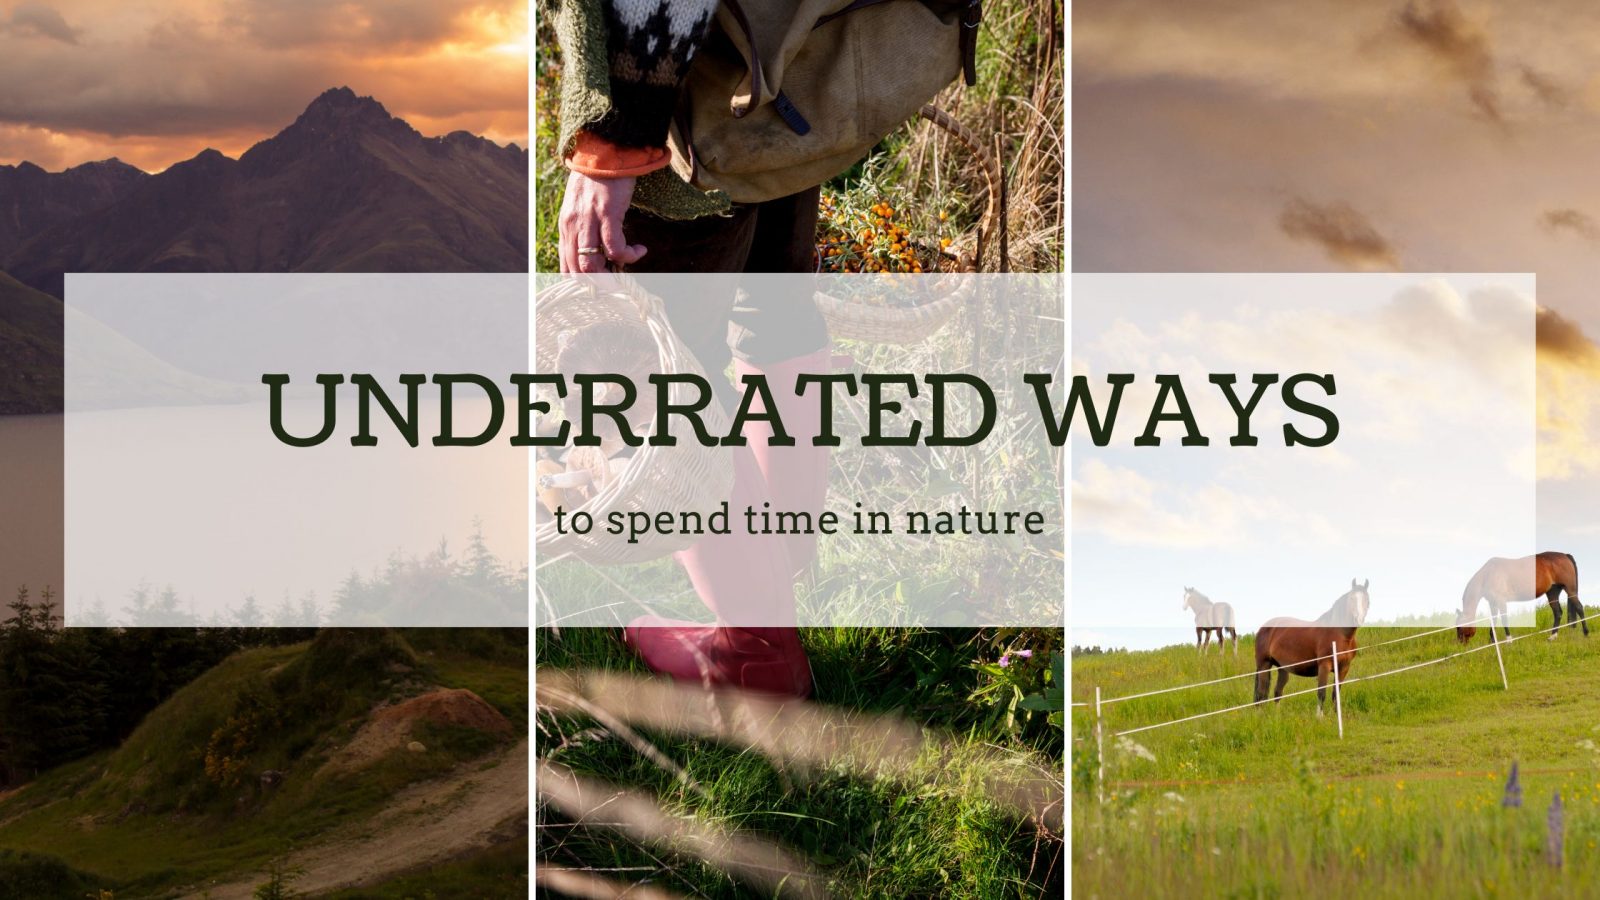 Underrated ways to spend time in nature